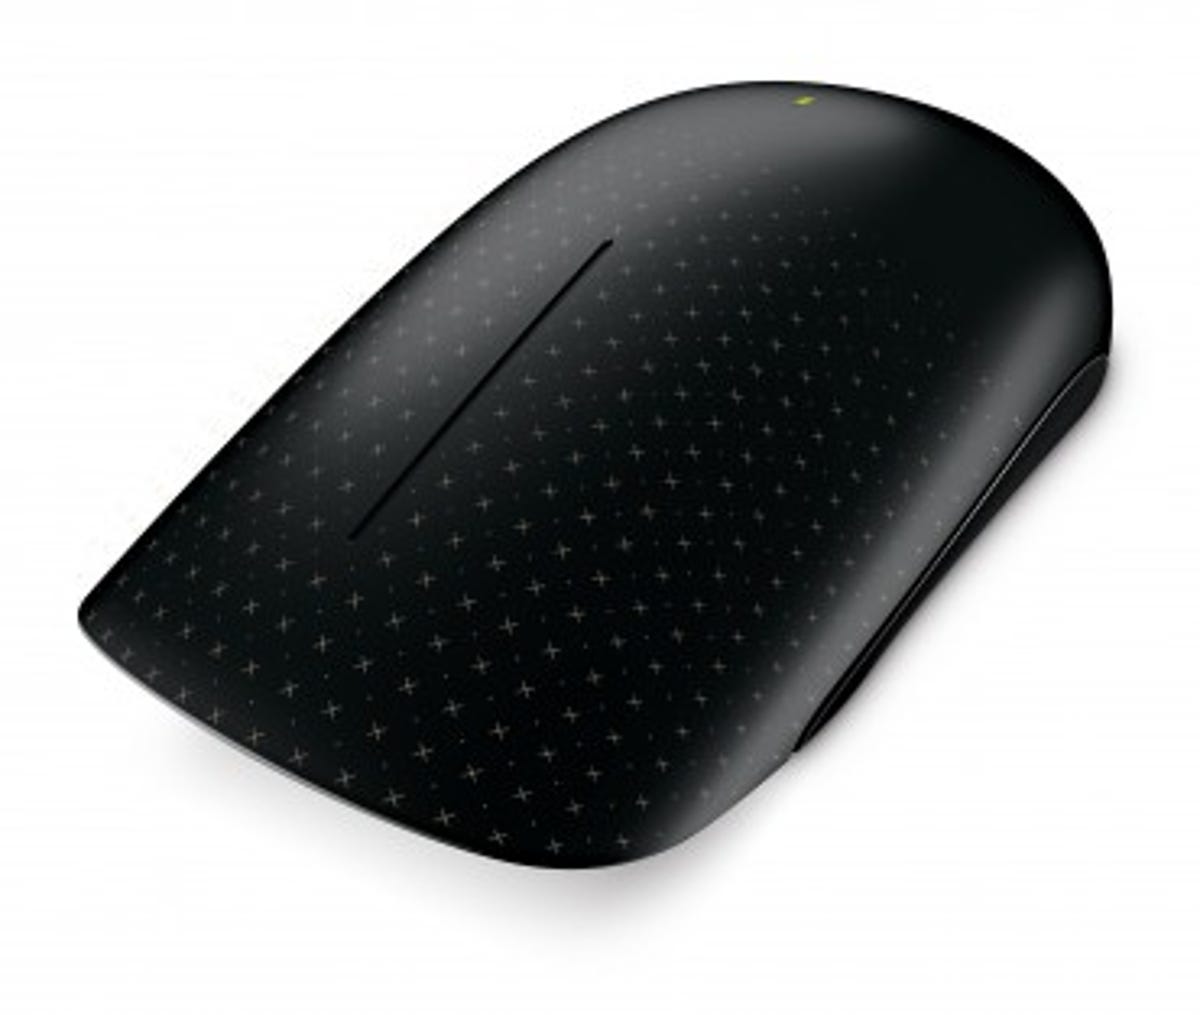 Microsoft's Touch Mouse: The future of mice?